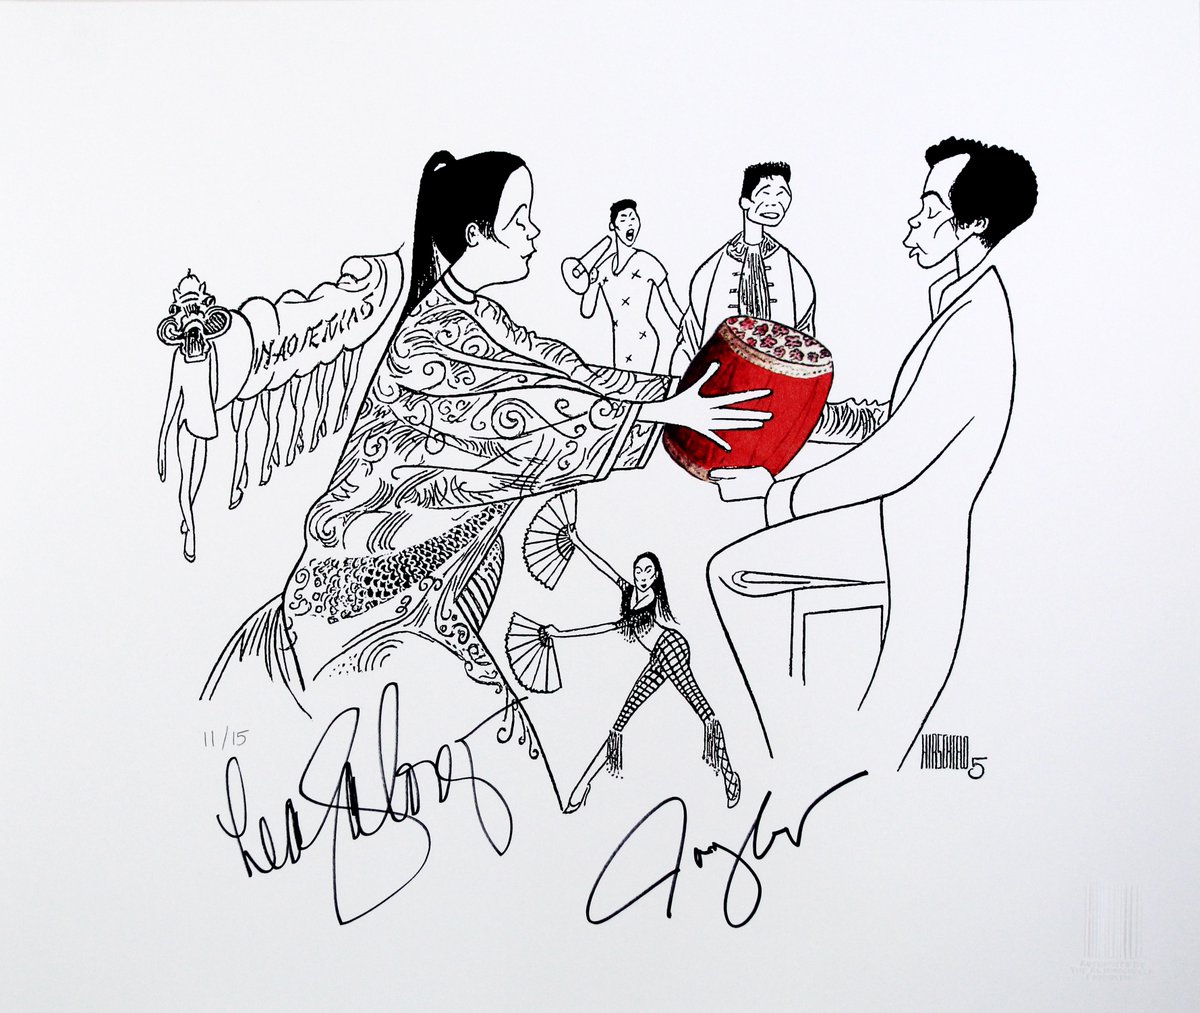 Lea Salonga and Jose Llana signed this print of the cast of the 2002 revival of the Rodgers and Hammerstein musical Flower Drum Song. Did you see this production on Broadway? Bid now at BroadwayCares.org/Hirschfeld #Hirschfeld #Auction #BroadwayCares #LeaSalonga #JoseLlana #Theater